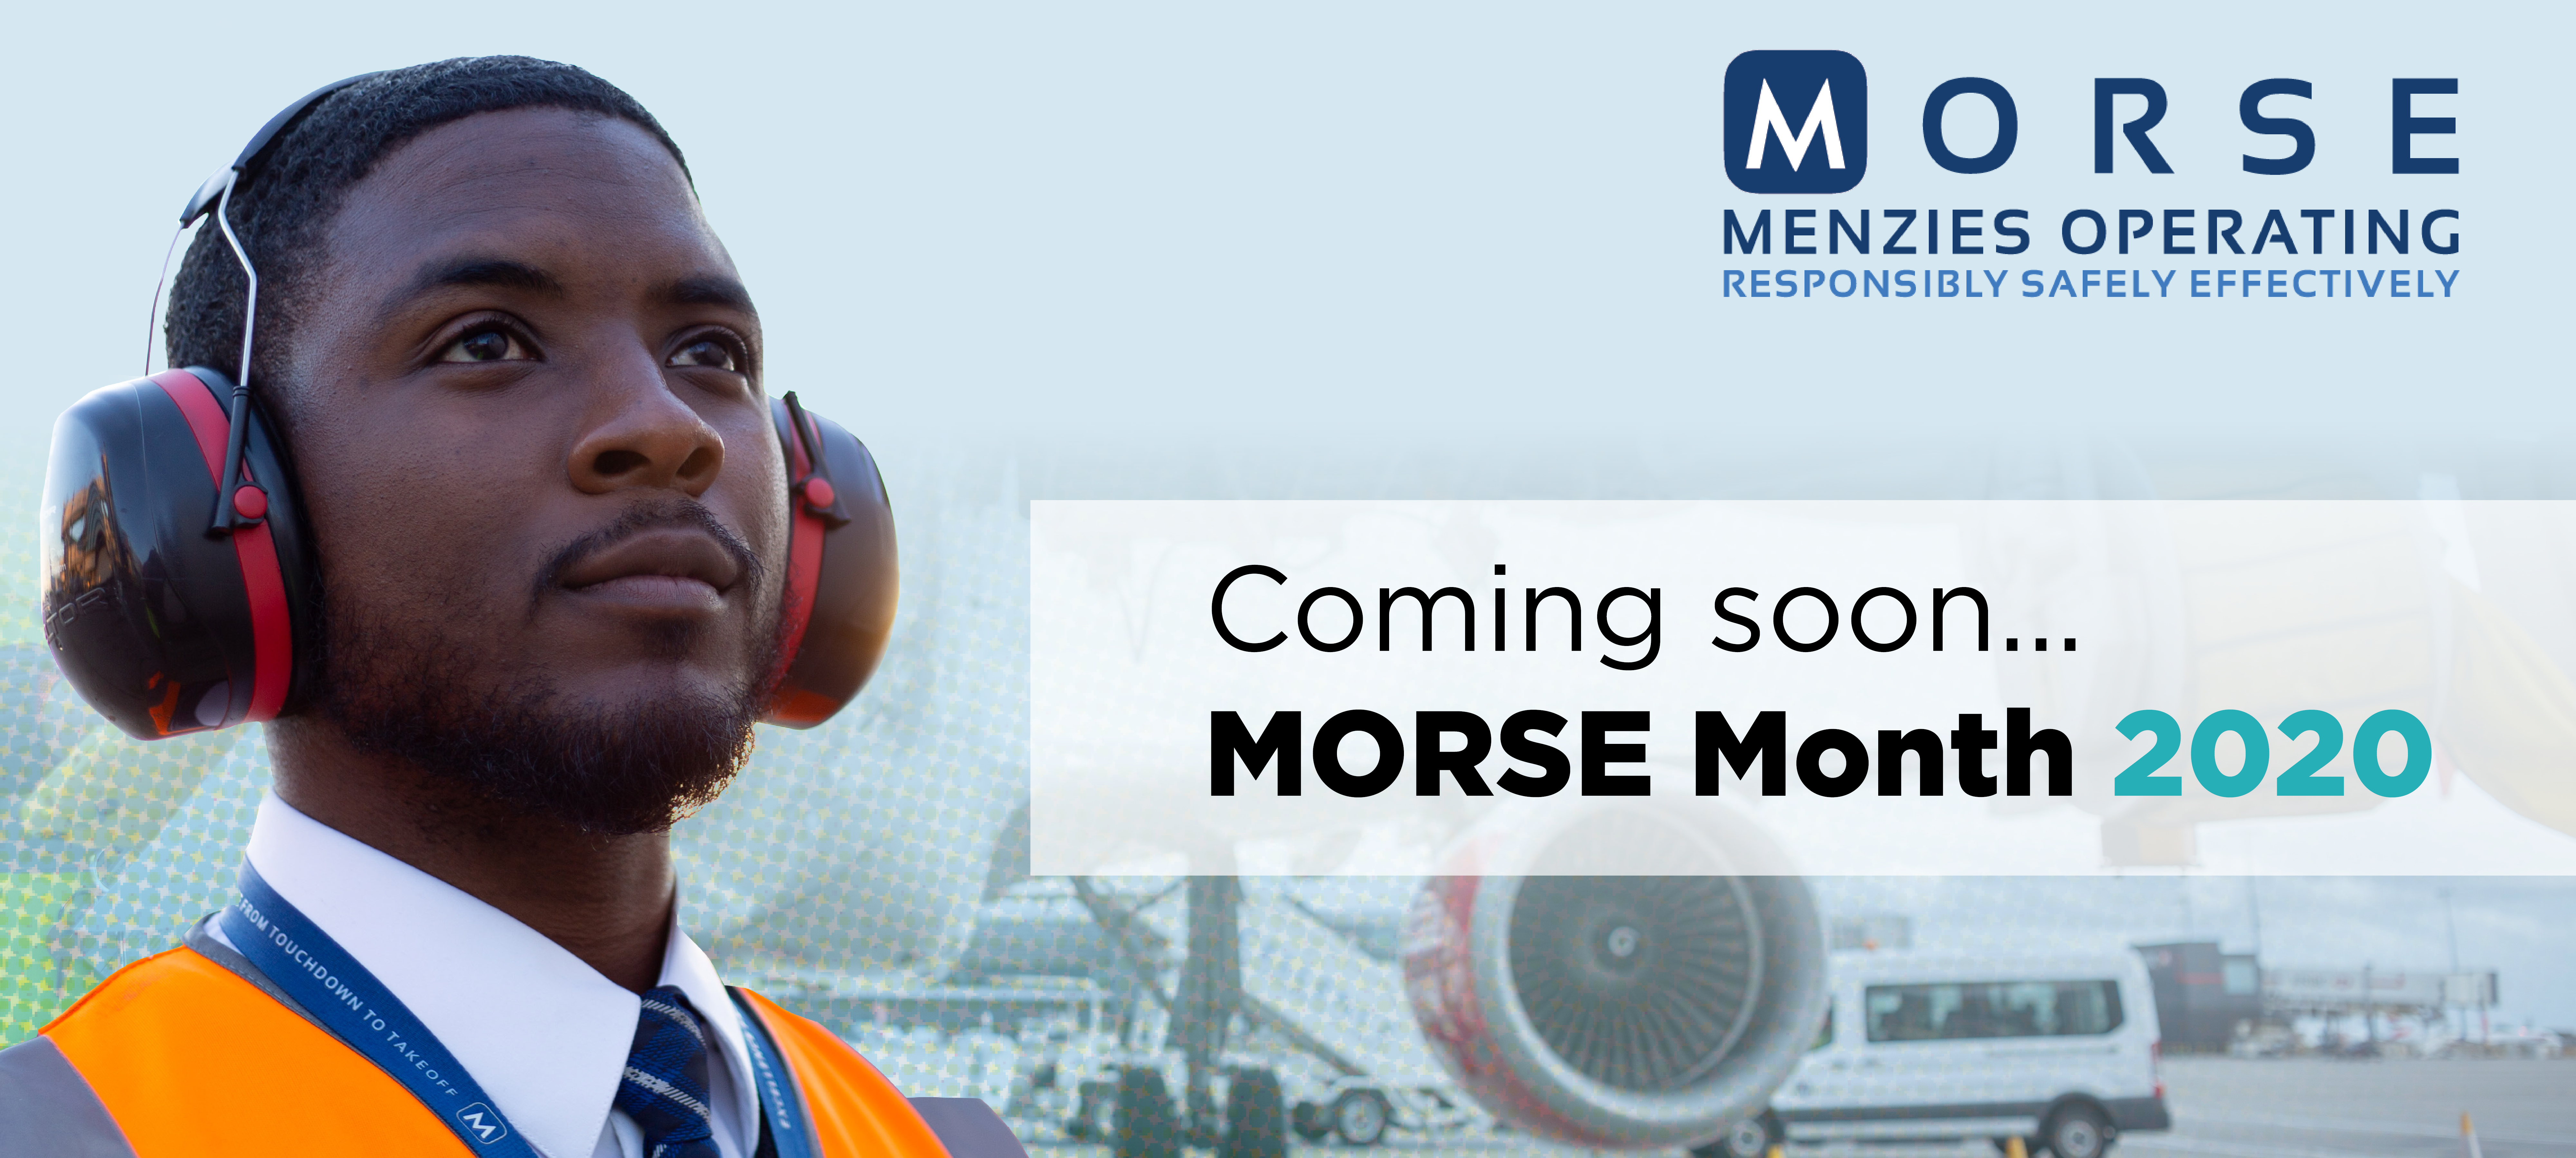 MORSE Month coming soon message